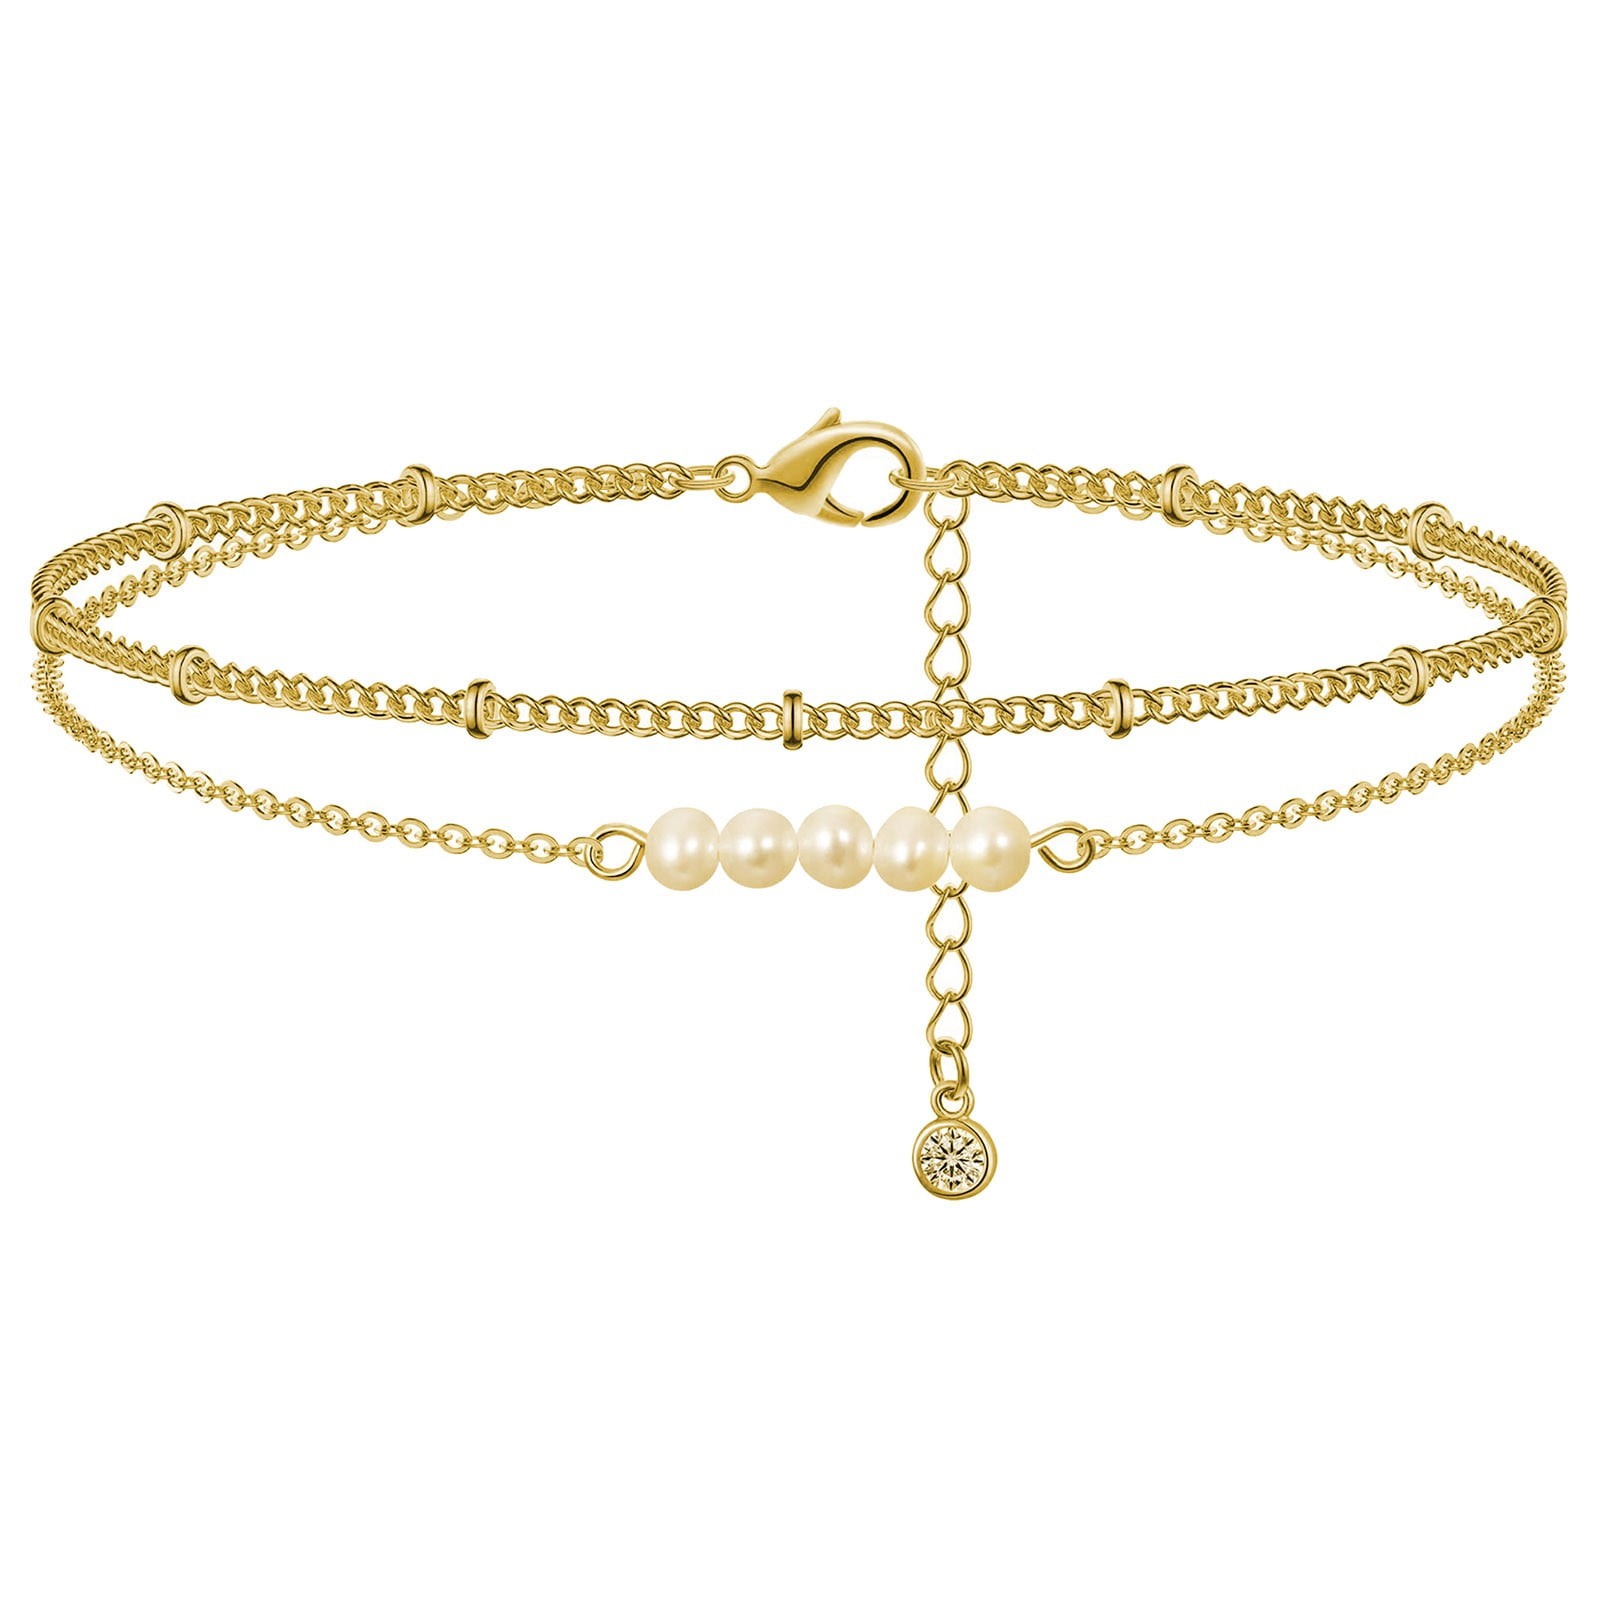 keusn boho double gold chains women pendant beads h bracelet for foot anklets layer pearl anklets ankle beach bracelet